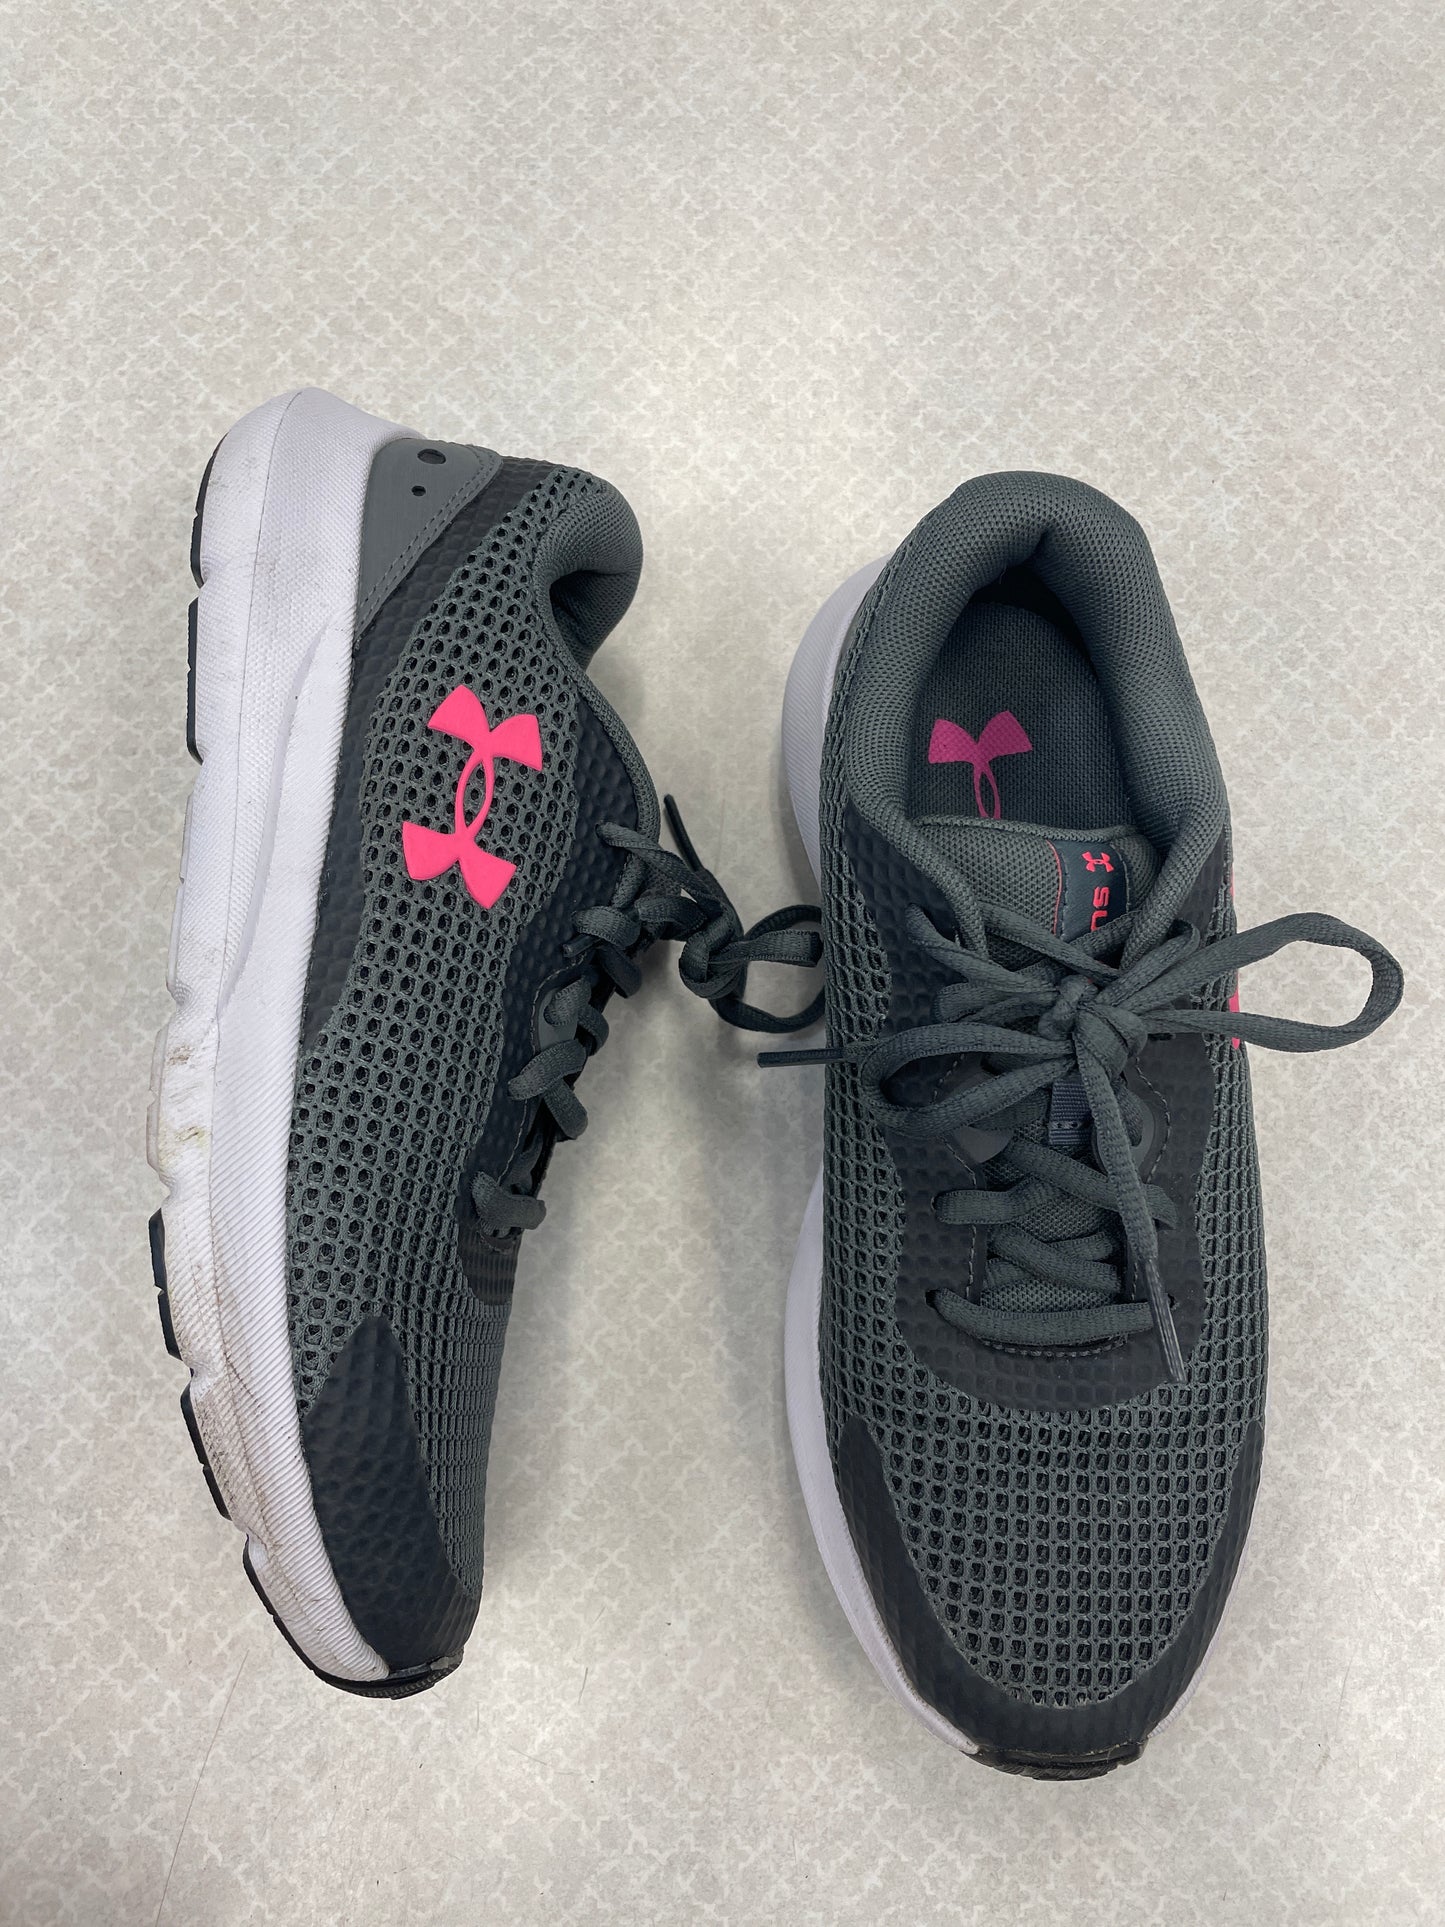 Shoes Athletic By Under Armour  Size: 7